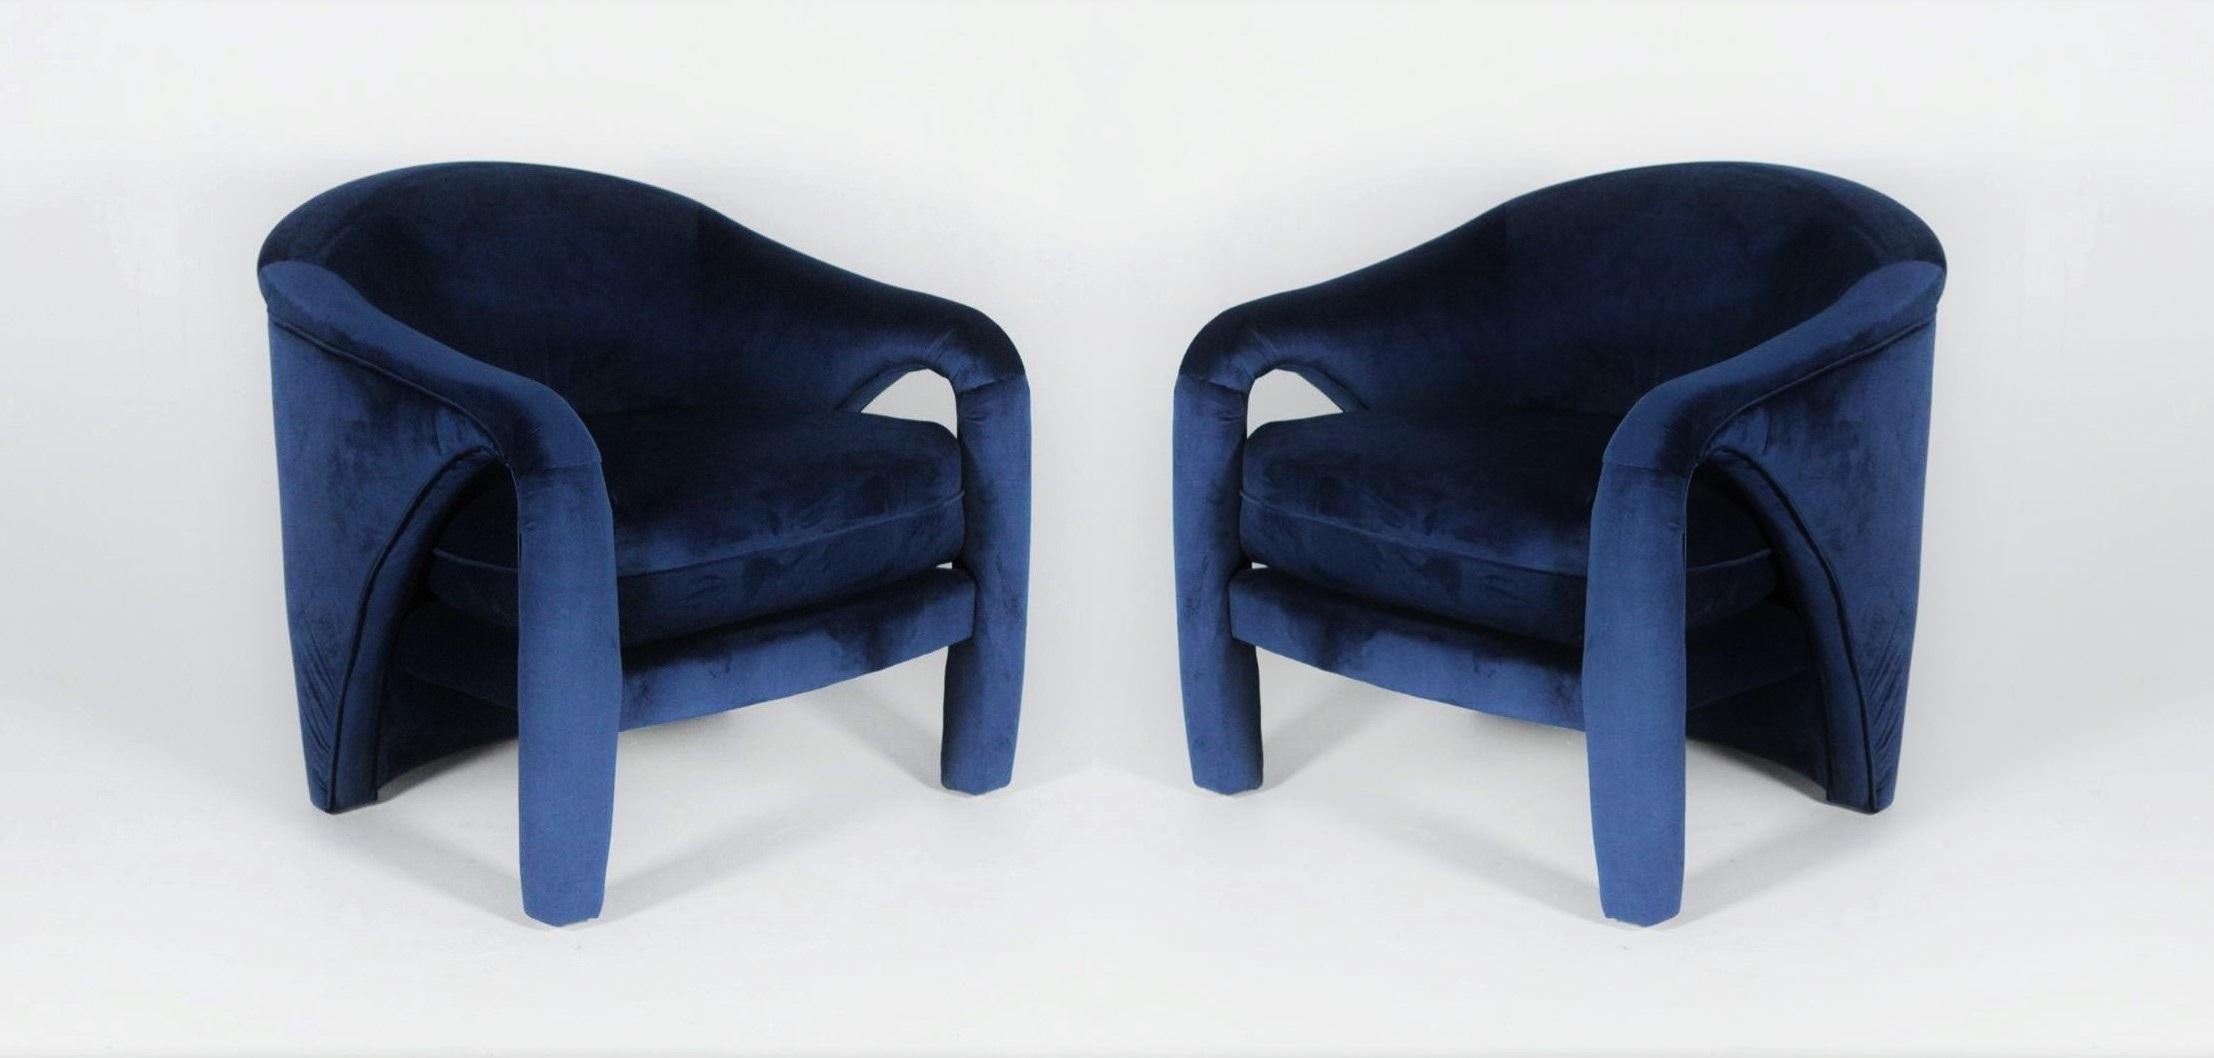 The sculptural lines of these chairs are what rooms are made of a stunning design from all angles. These chairs have been carefully restored and upholstered in a rich blue velvet. Truly a stunning set.